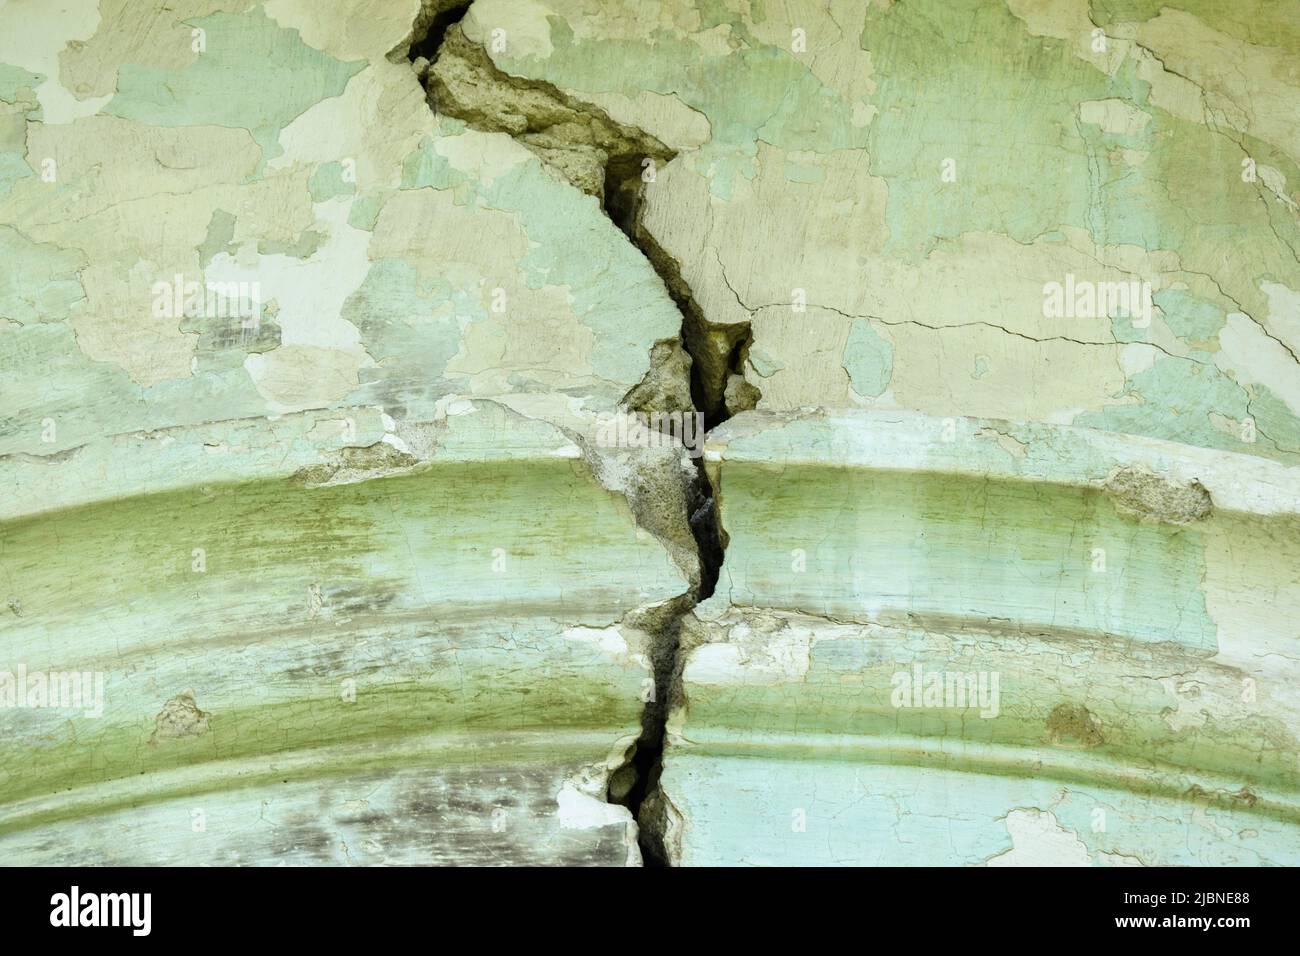 Big winding crack in arched structure, abstract image of vertical cleft. Close up. Copy space. Selective focus. Stock Photo